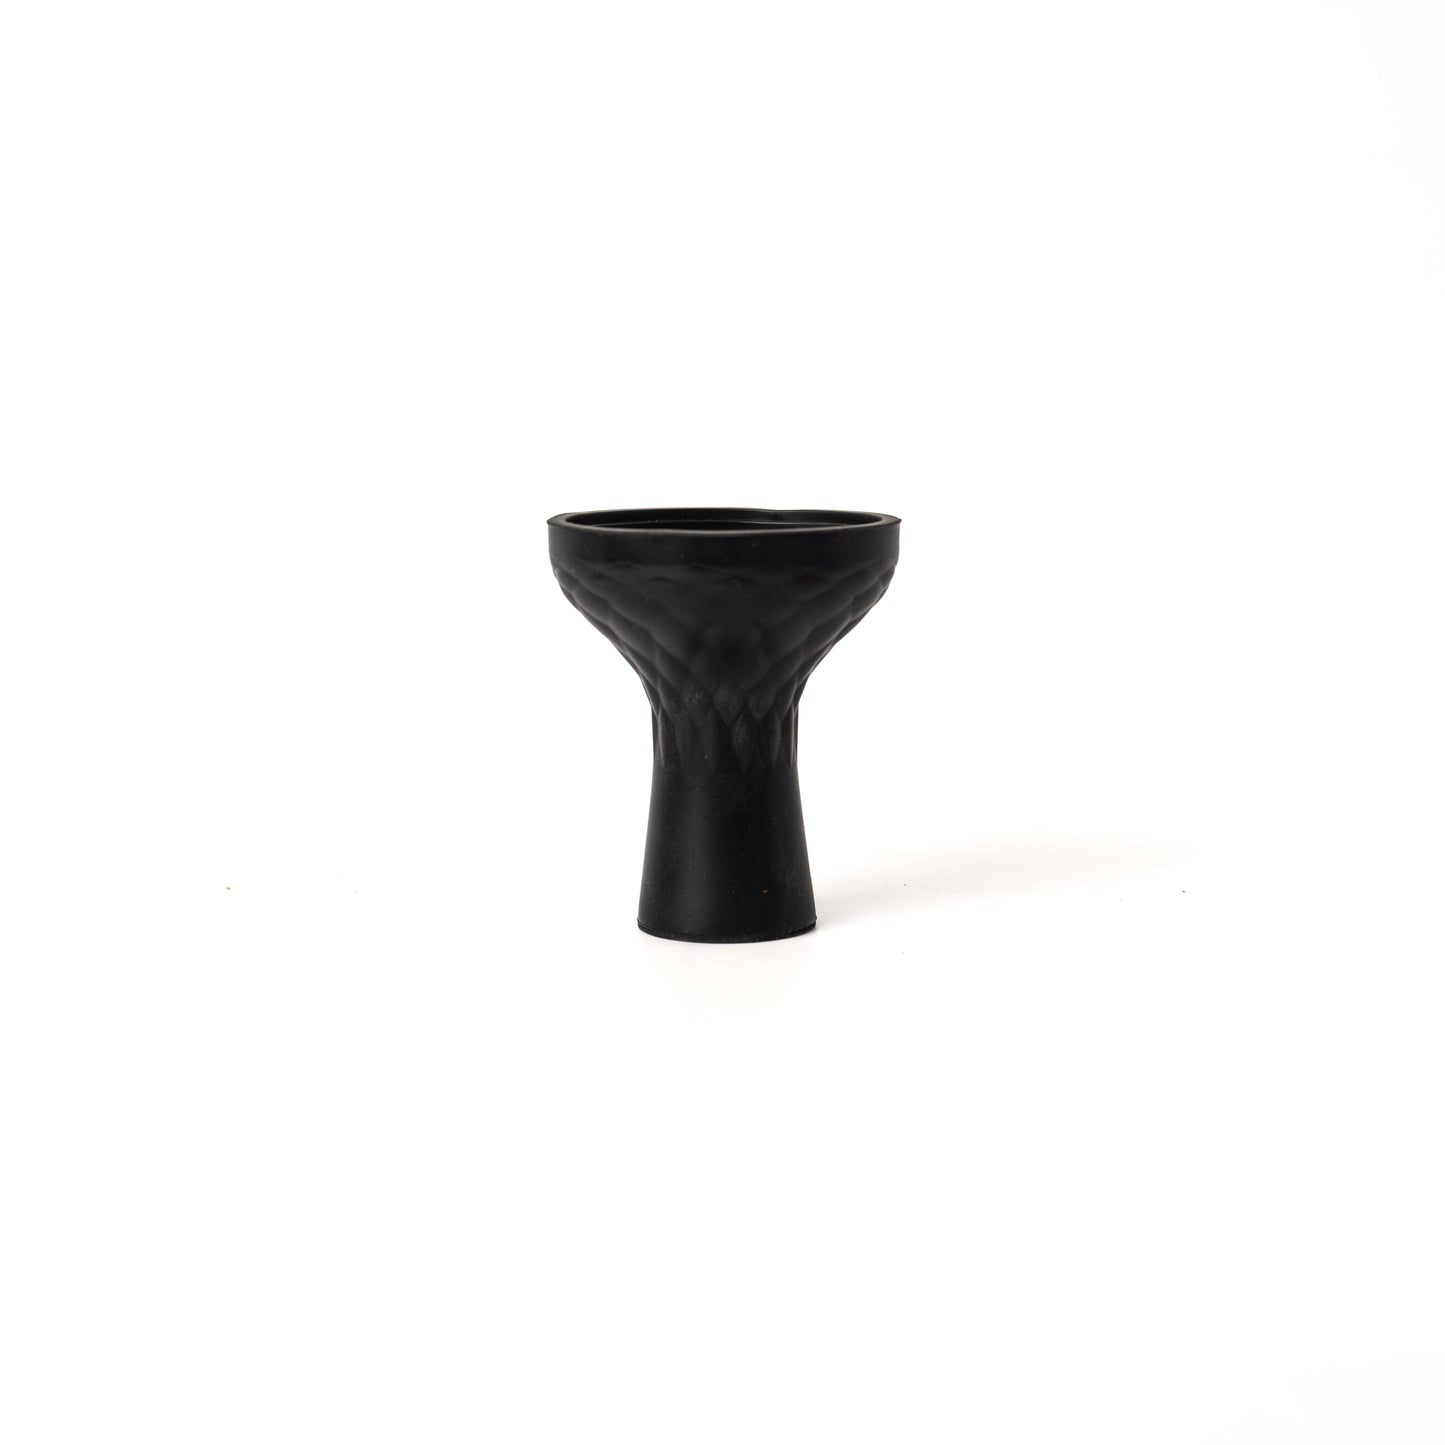 Unbreakable Silicone Chillum for Hookah - Black